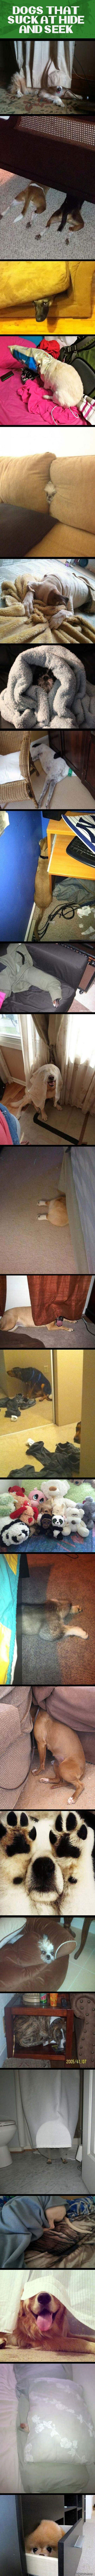 hide and seek dogs funny picture